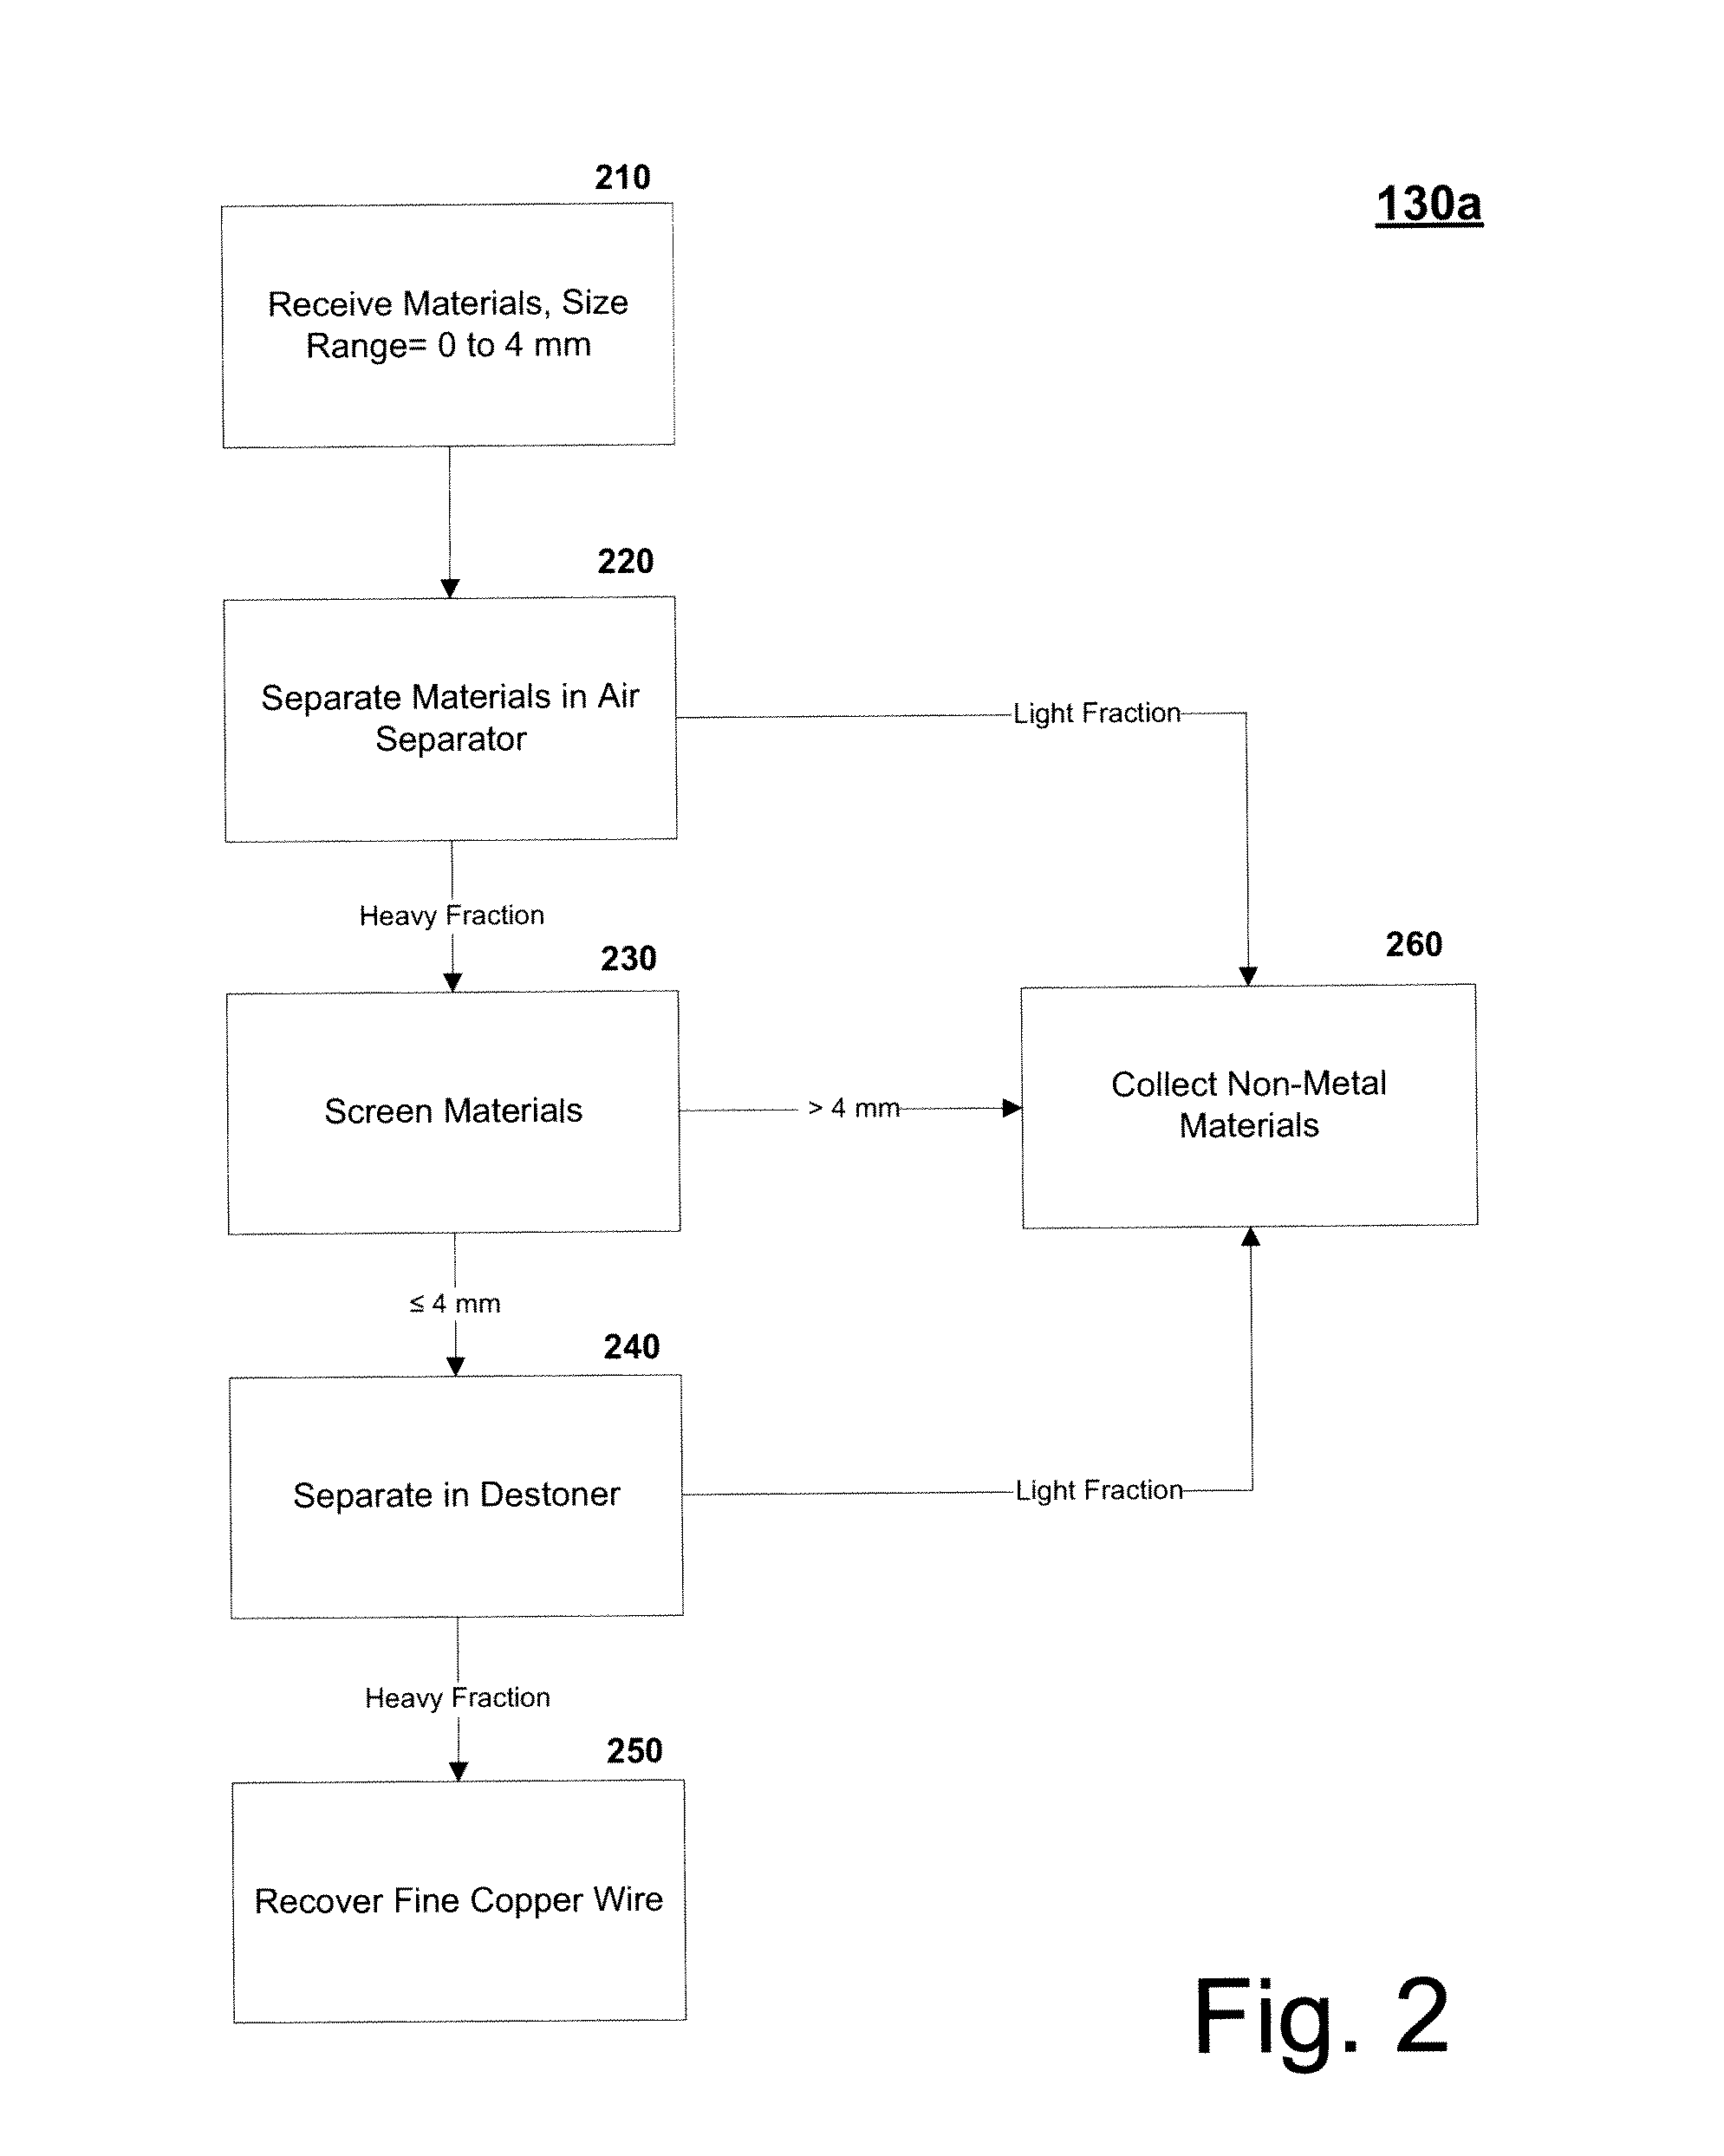 Method and System for Separating and Recovering Wire and Other Metal from Processed Recycled Materials